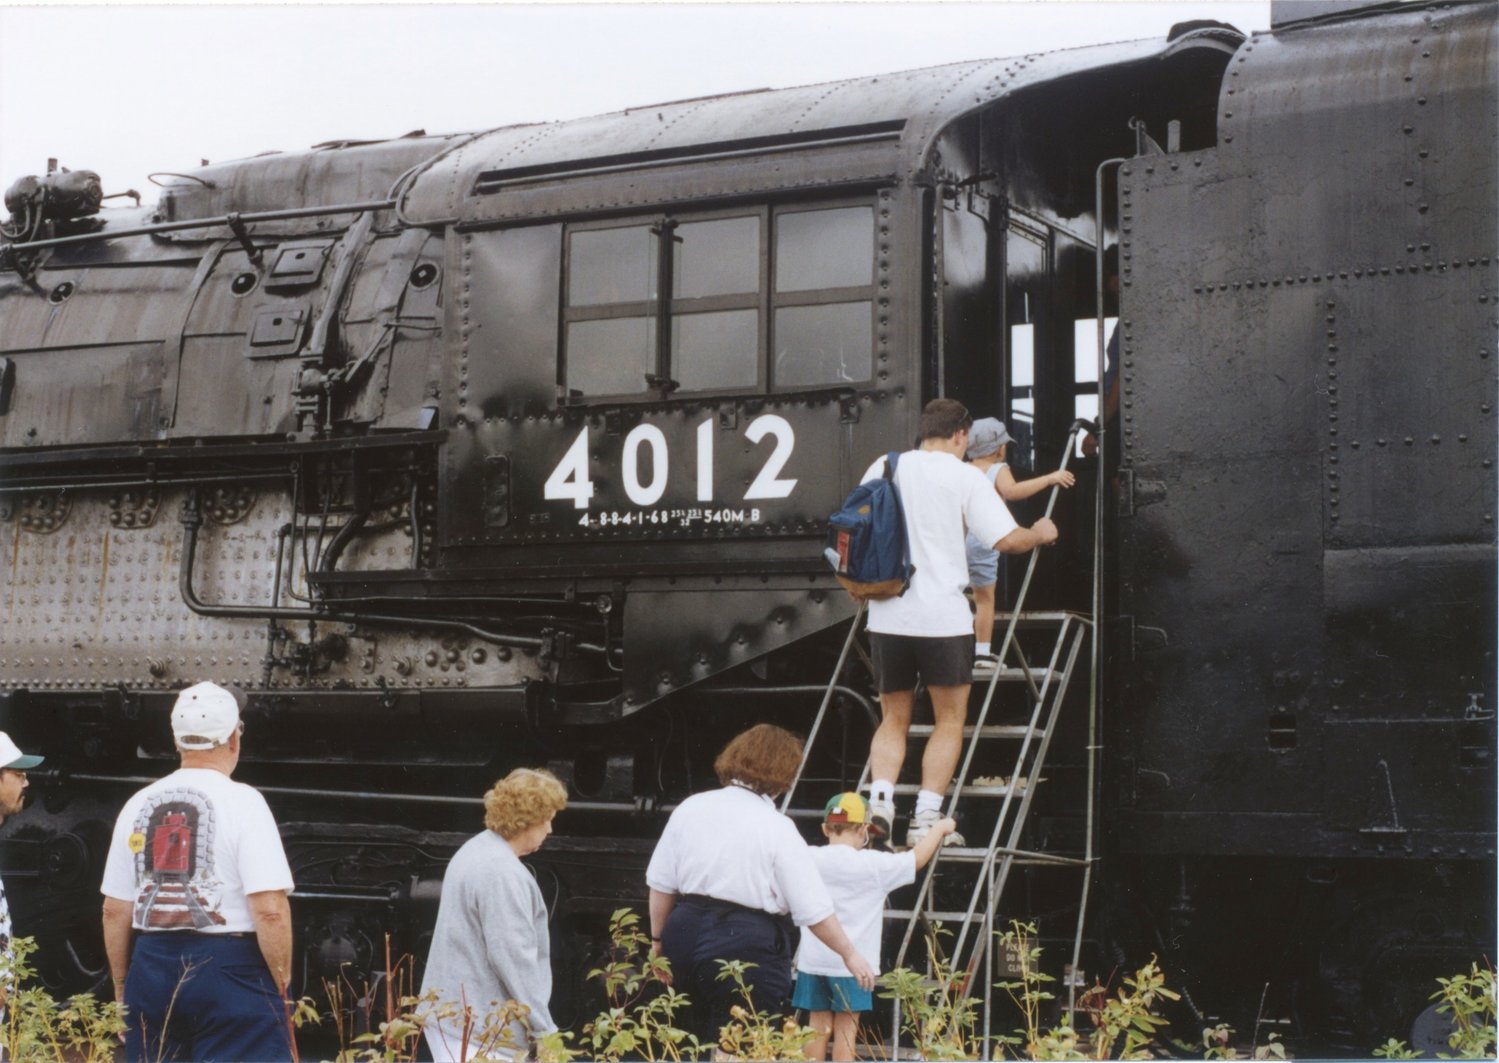 Visitors lined up for a tour of the "Big Boy" cab at Steamtown NHS back in 1997.